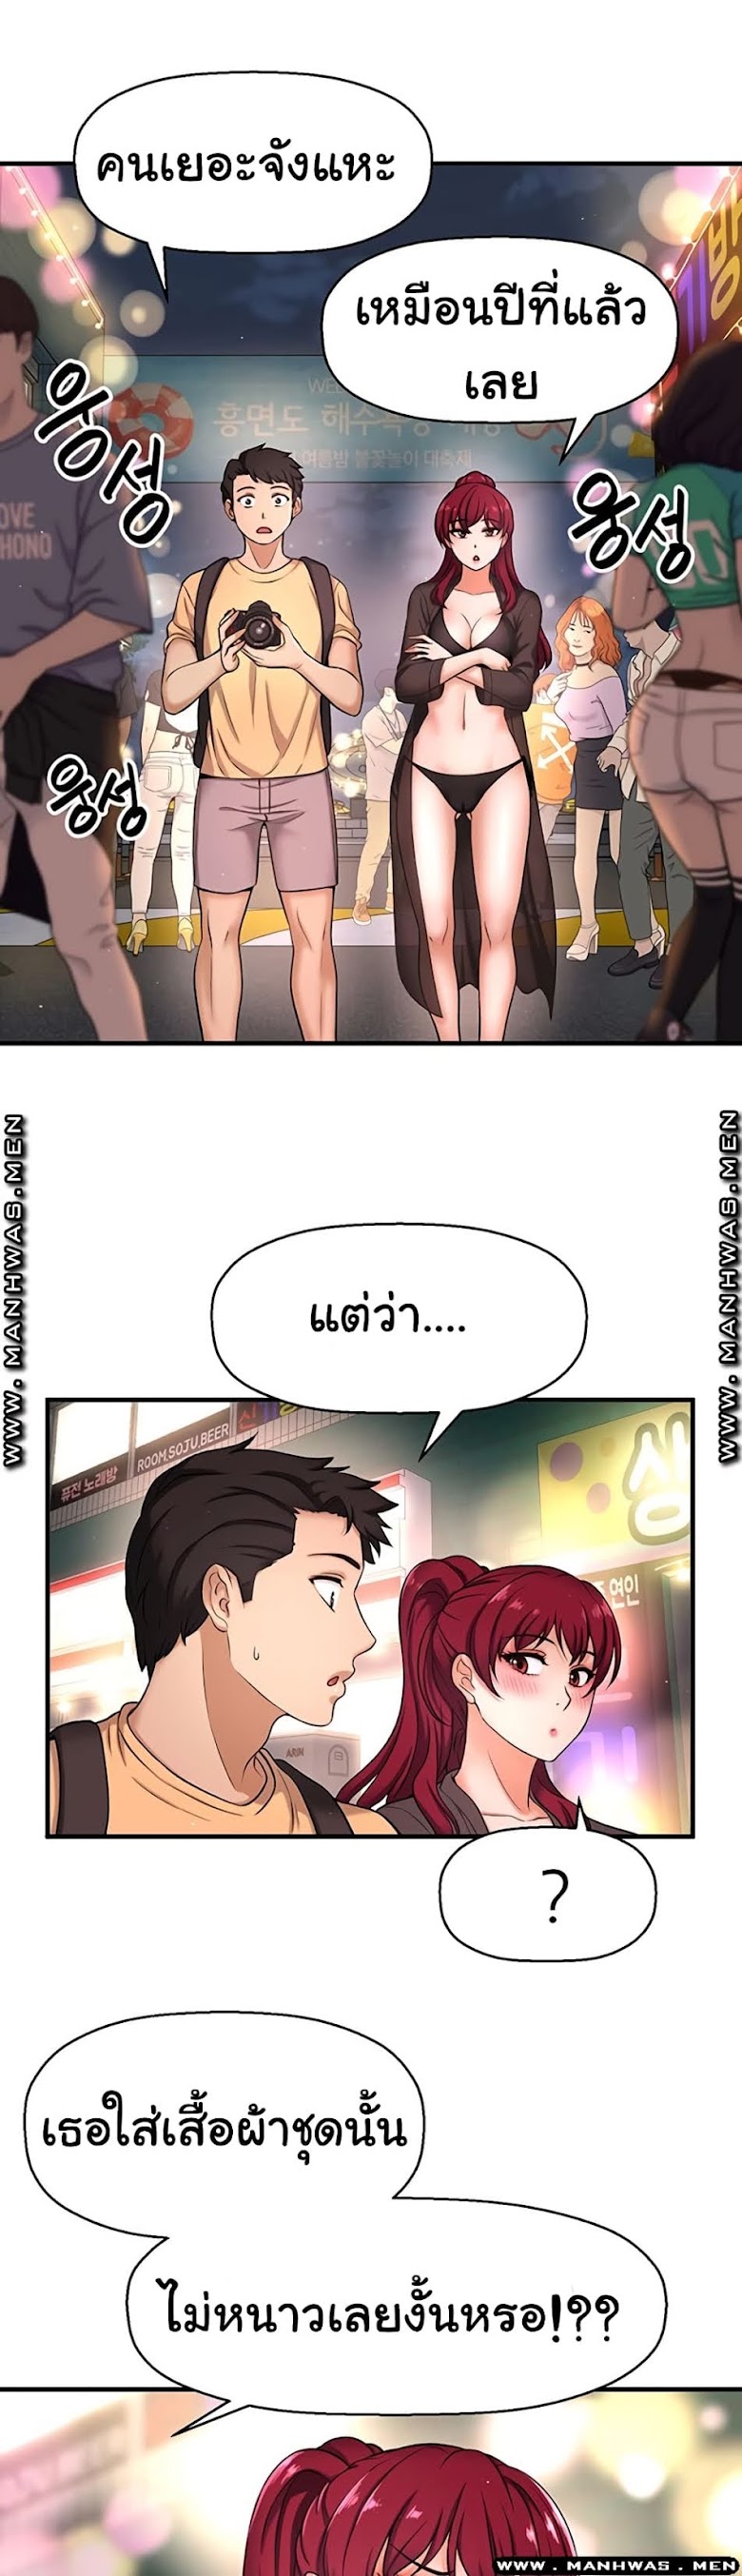 I Want to Know Her - หน้า 46